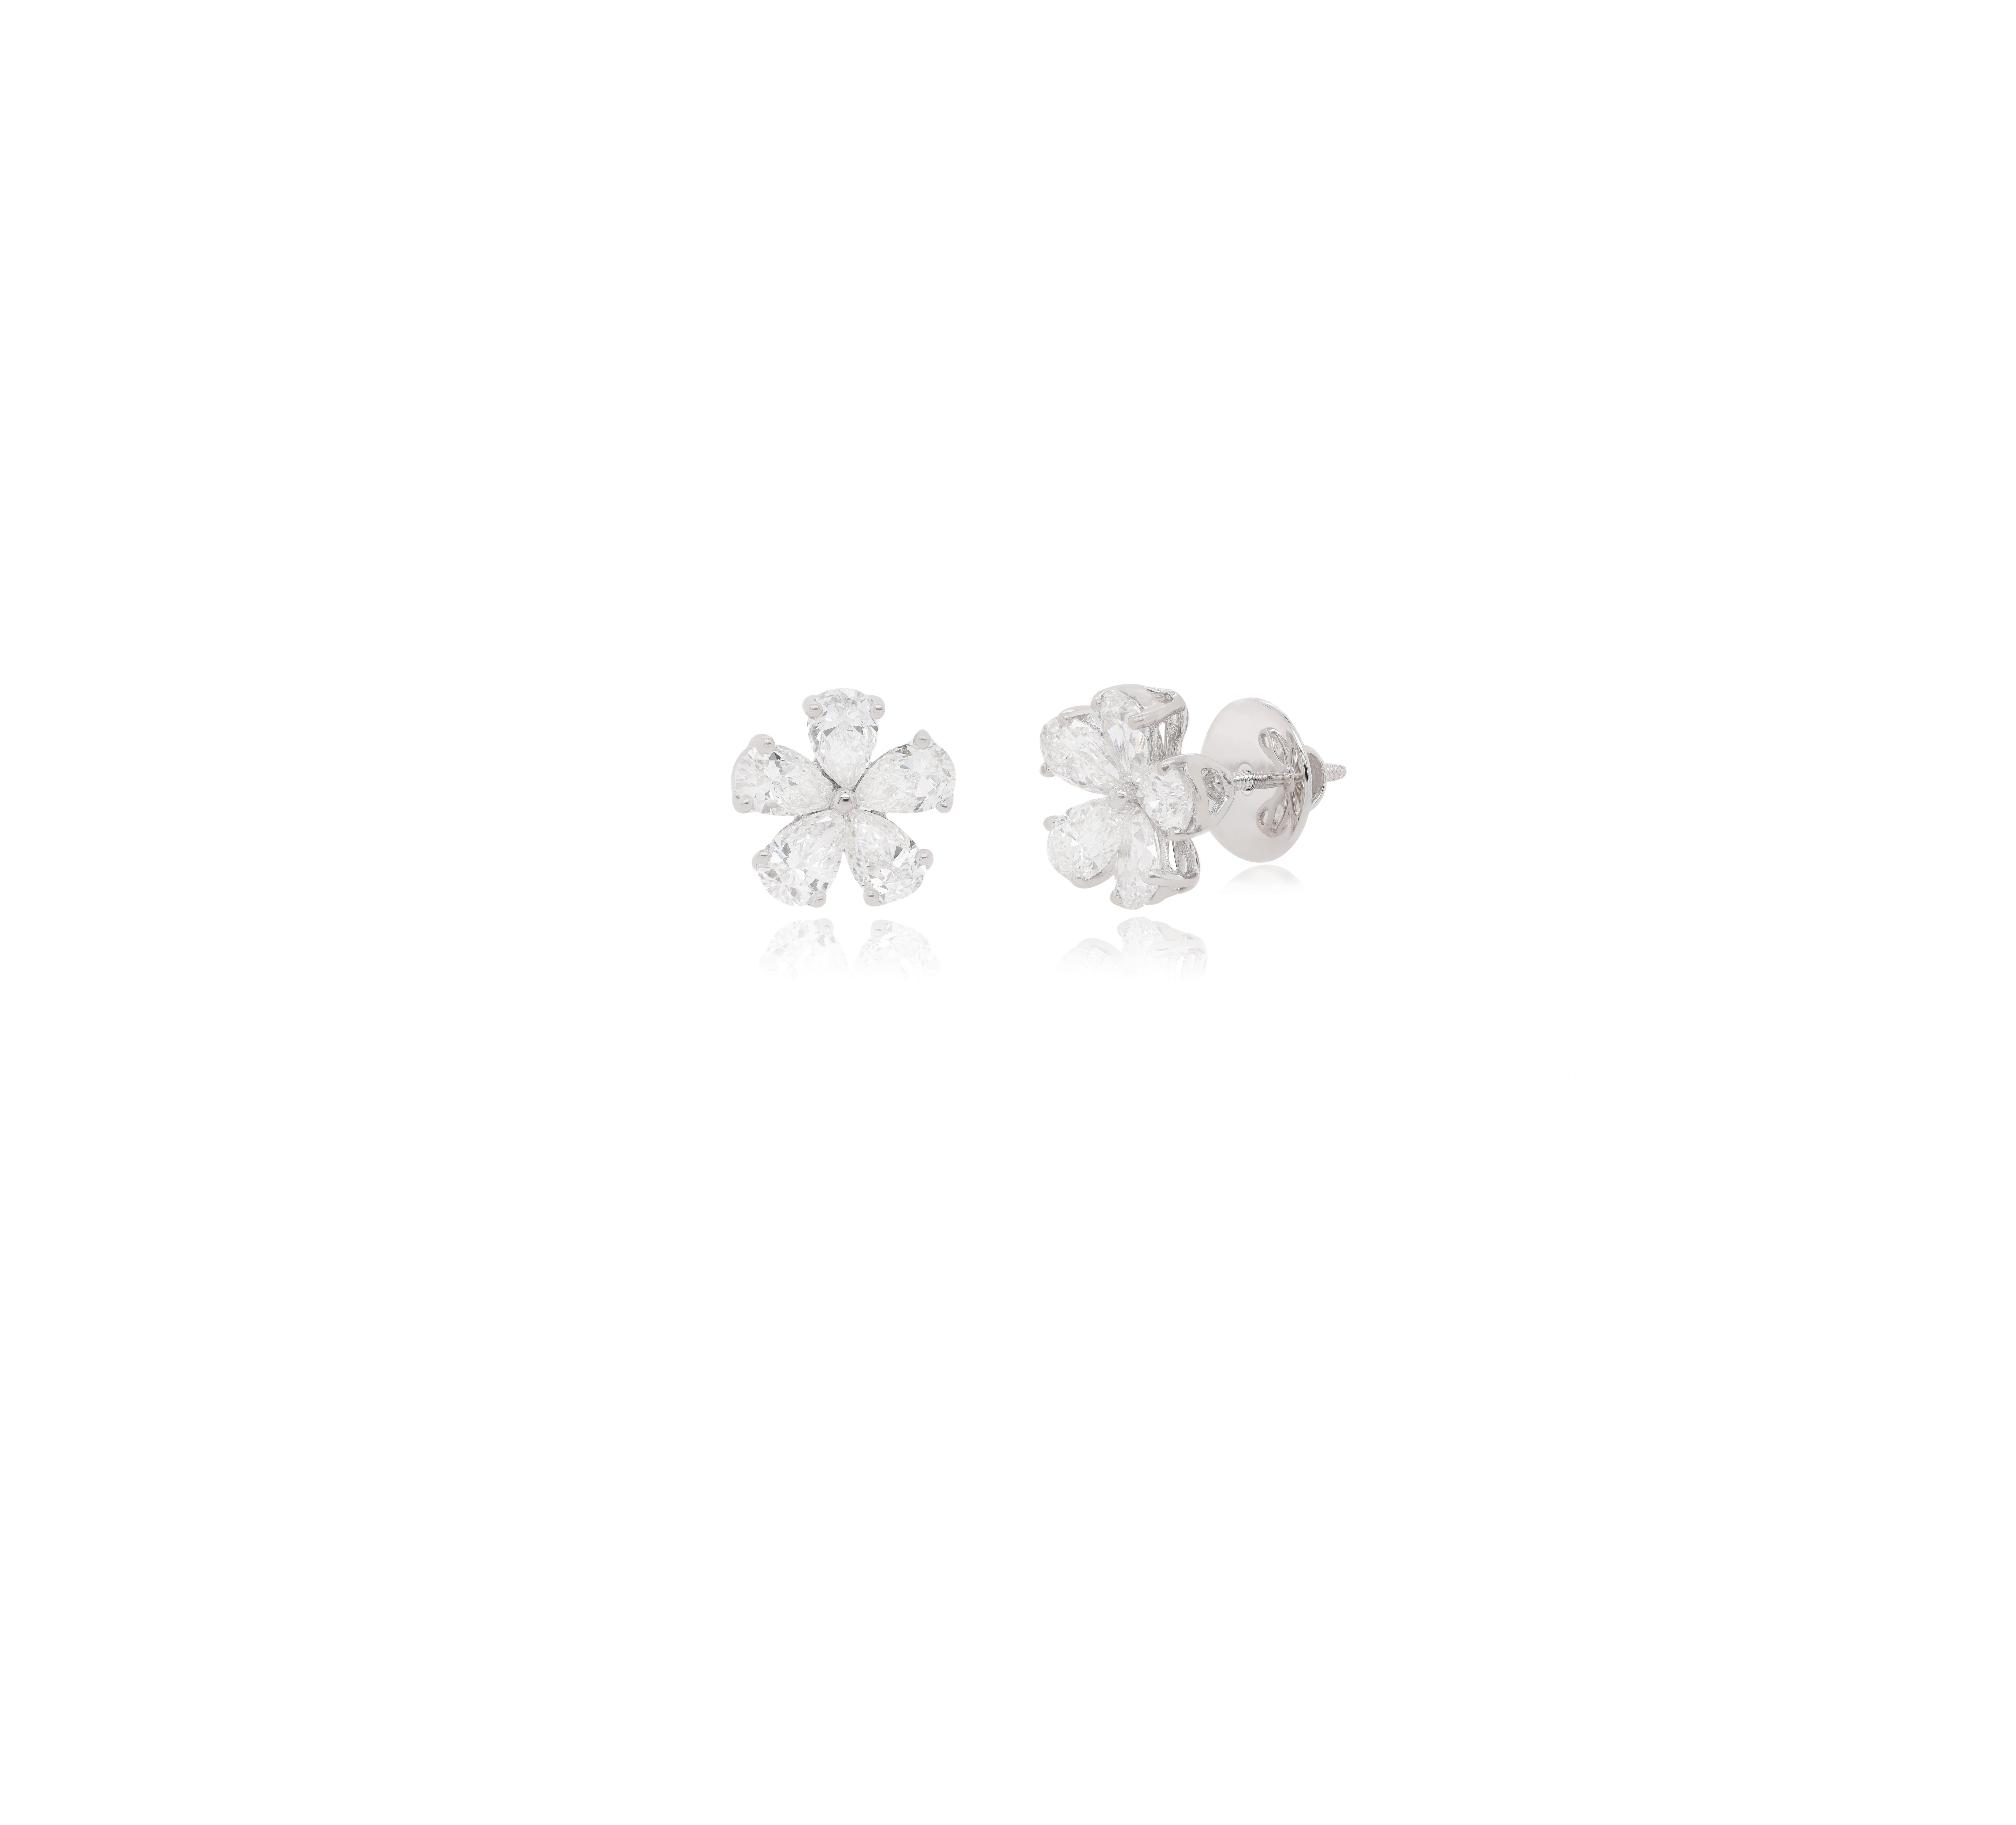 18KT WHITE GOLD EARRING STUDS FLOWER PEAR SHAPE 4.01CTS DIAMONDS, 10STONE
Diana M. is a leading supplier of top-quality fine jewelry for over 35 years.
Diana M is one-stop shop for all your jewelry shopping, carrying line of diamond rings, earrings,